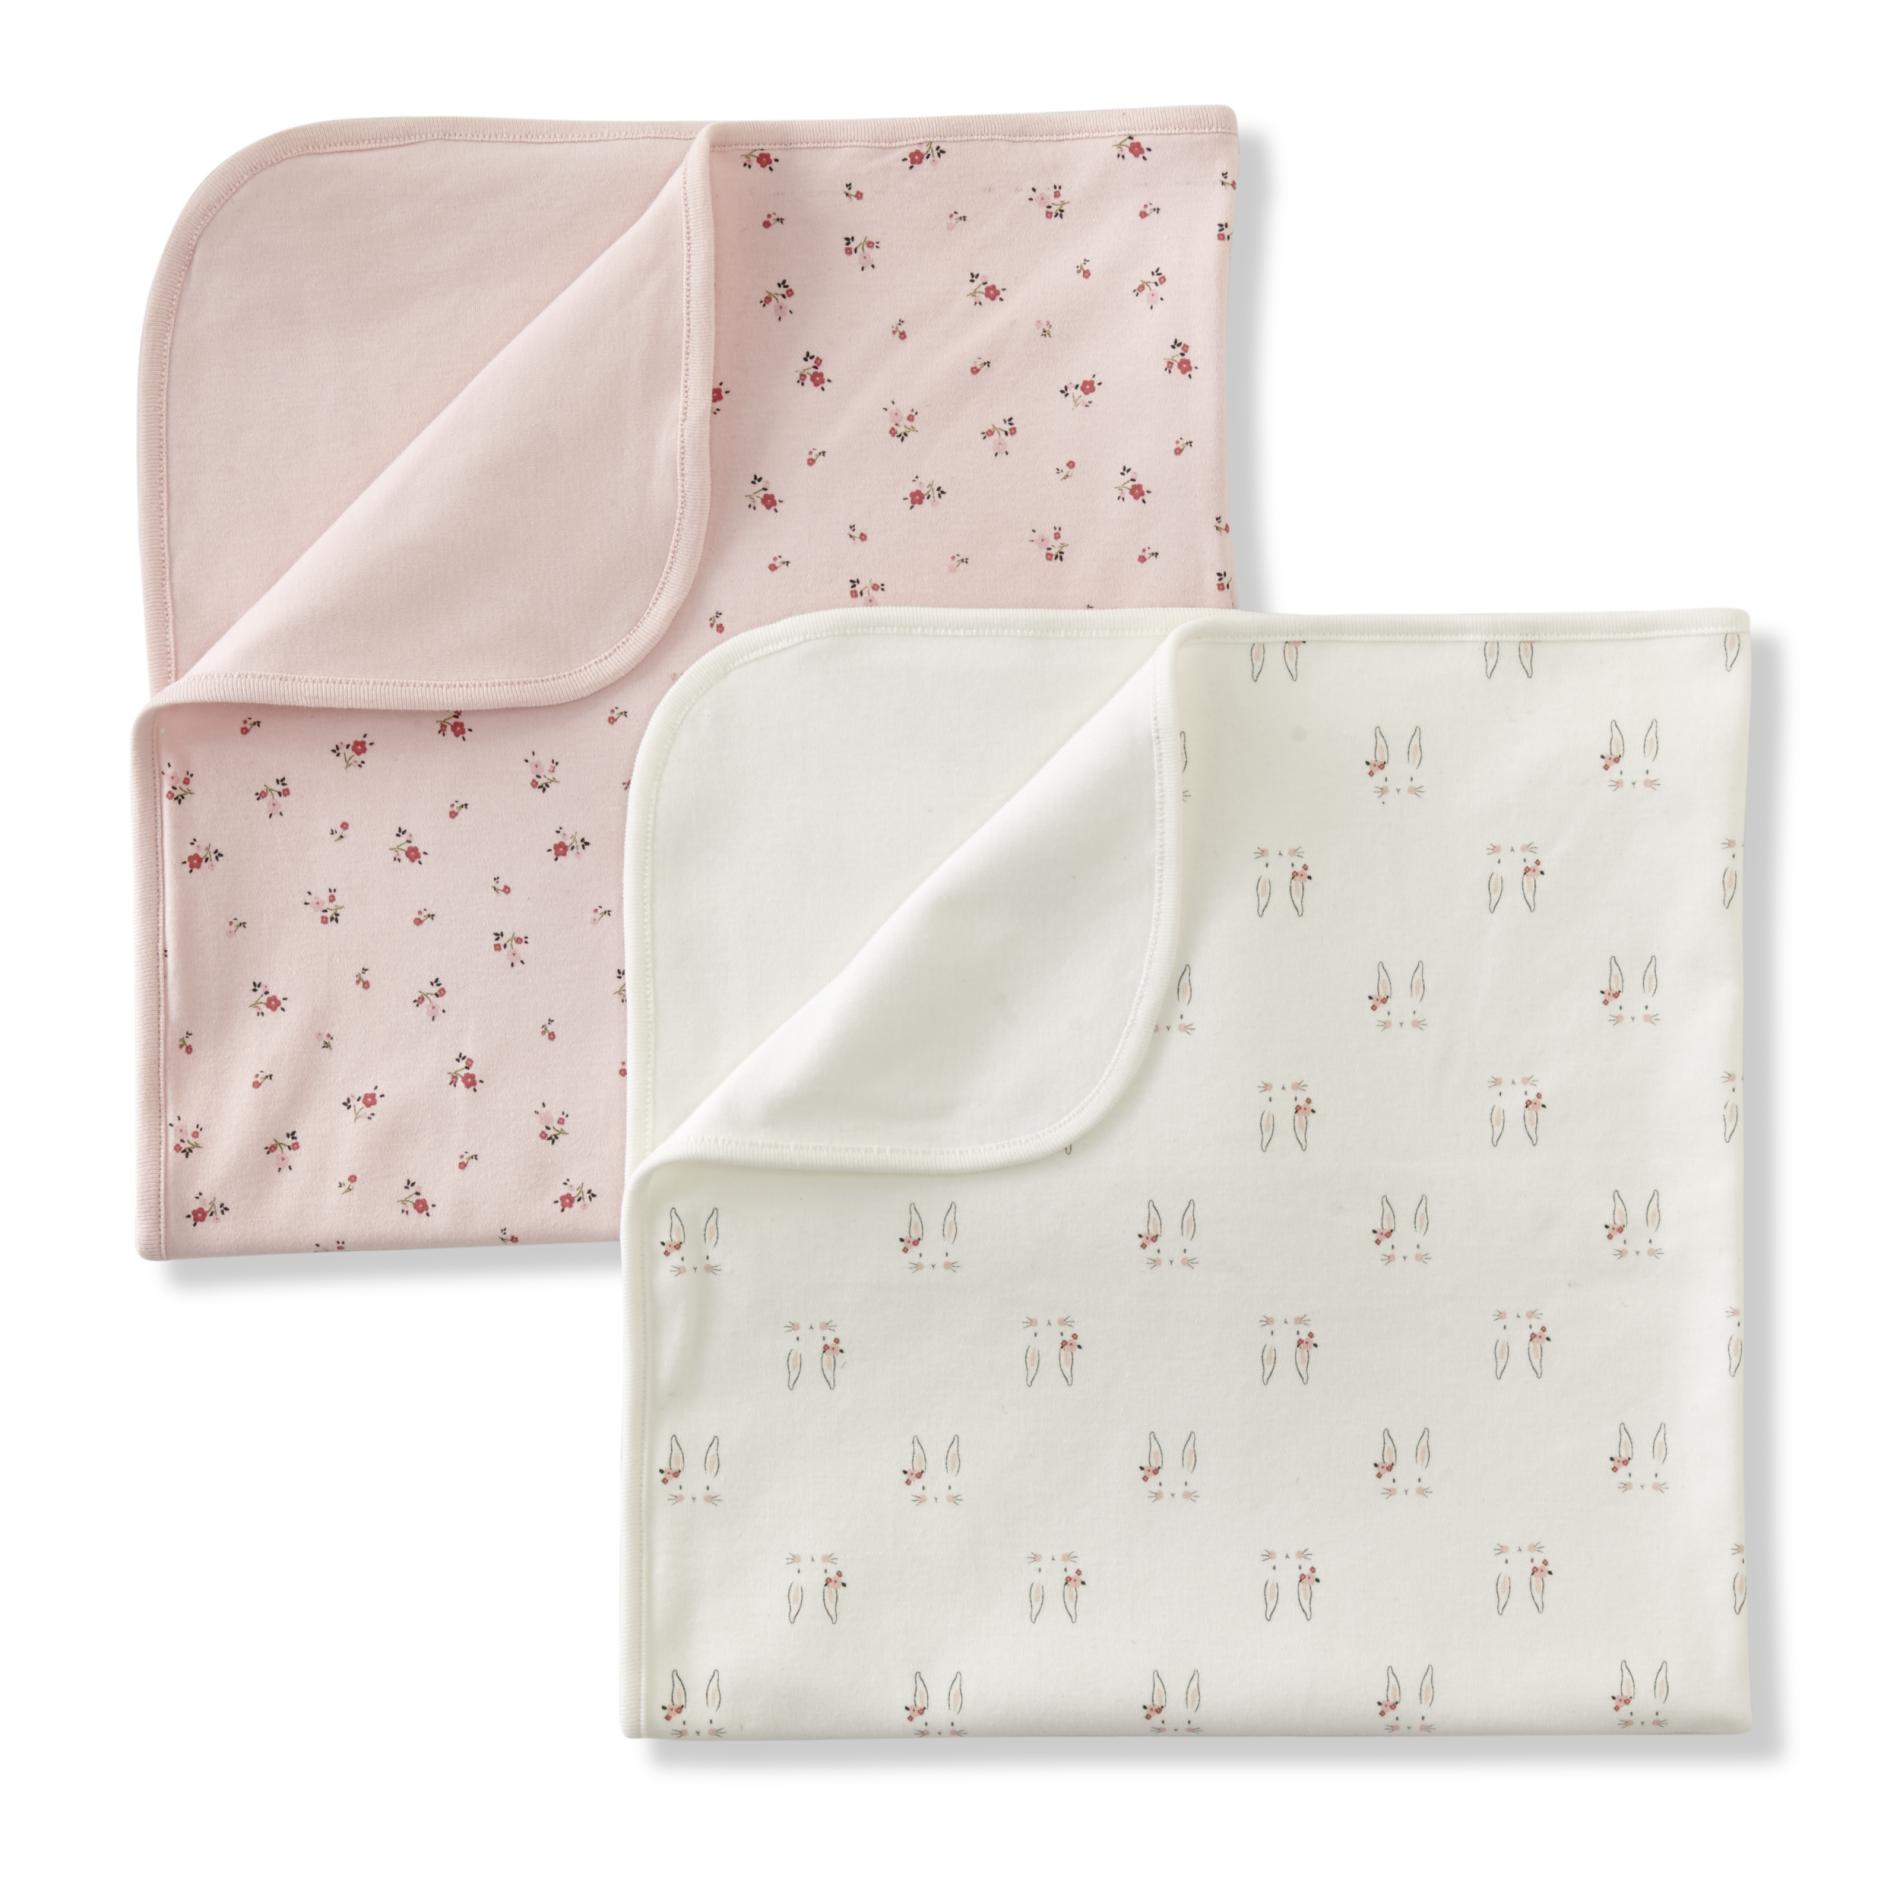 SPENCER BY JACLYN SMITH Infant Girls' 2-Pack Receiving Blankets - Bunny & Floral